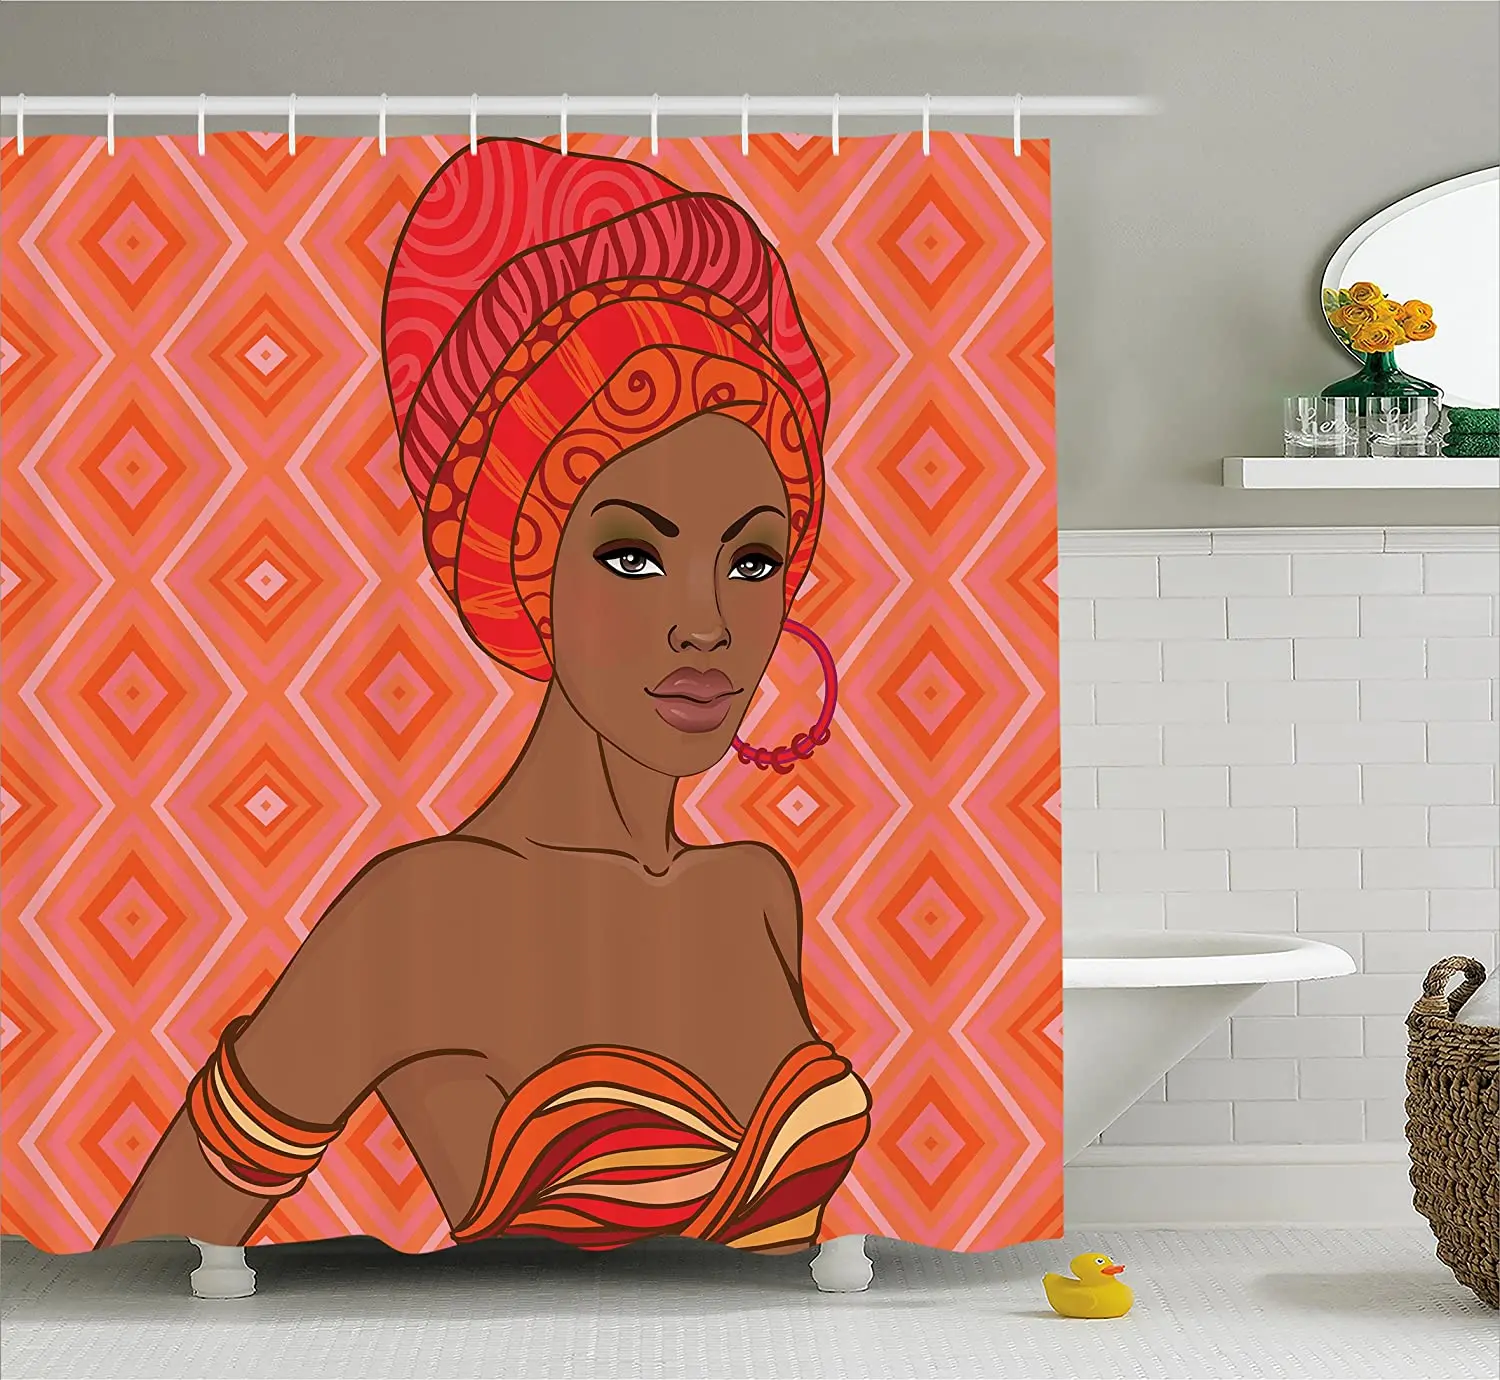 

Afro Shower Curtain Portrait of African Woman in Ethnic Dress Zulu Elegance Tribal Graphic Print Waterproof Curtains Home Decor